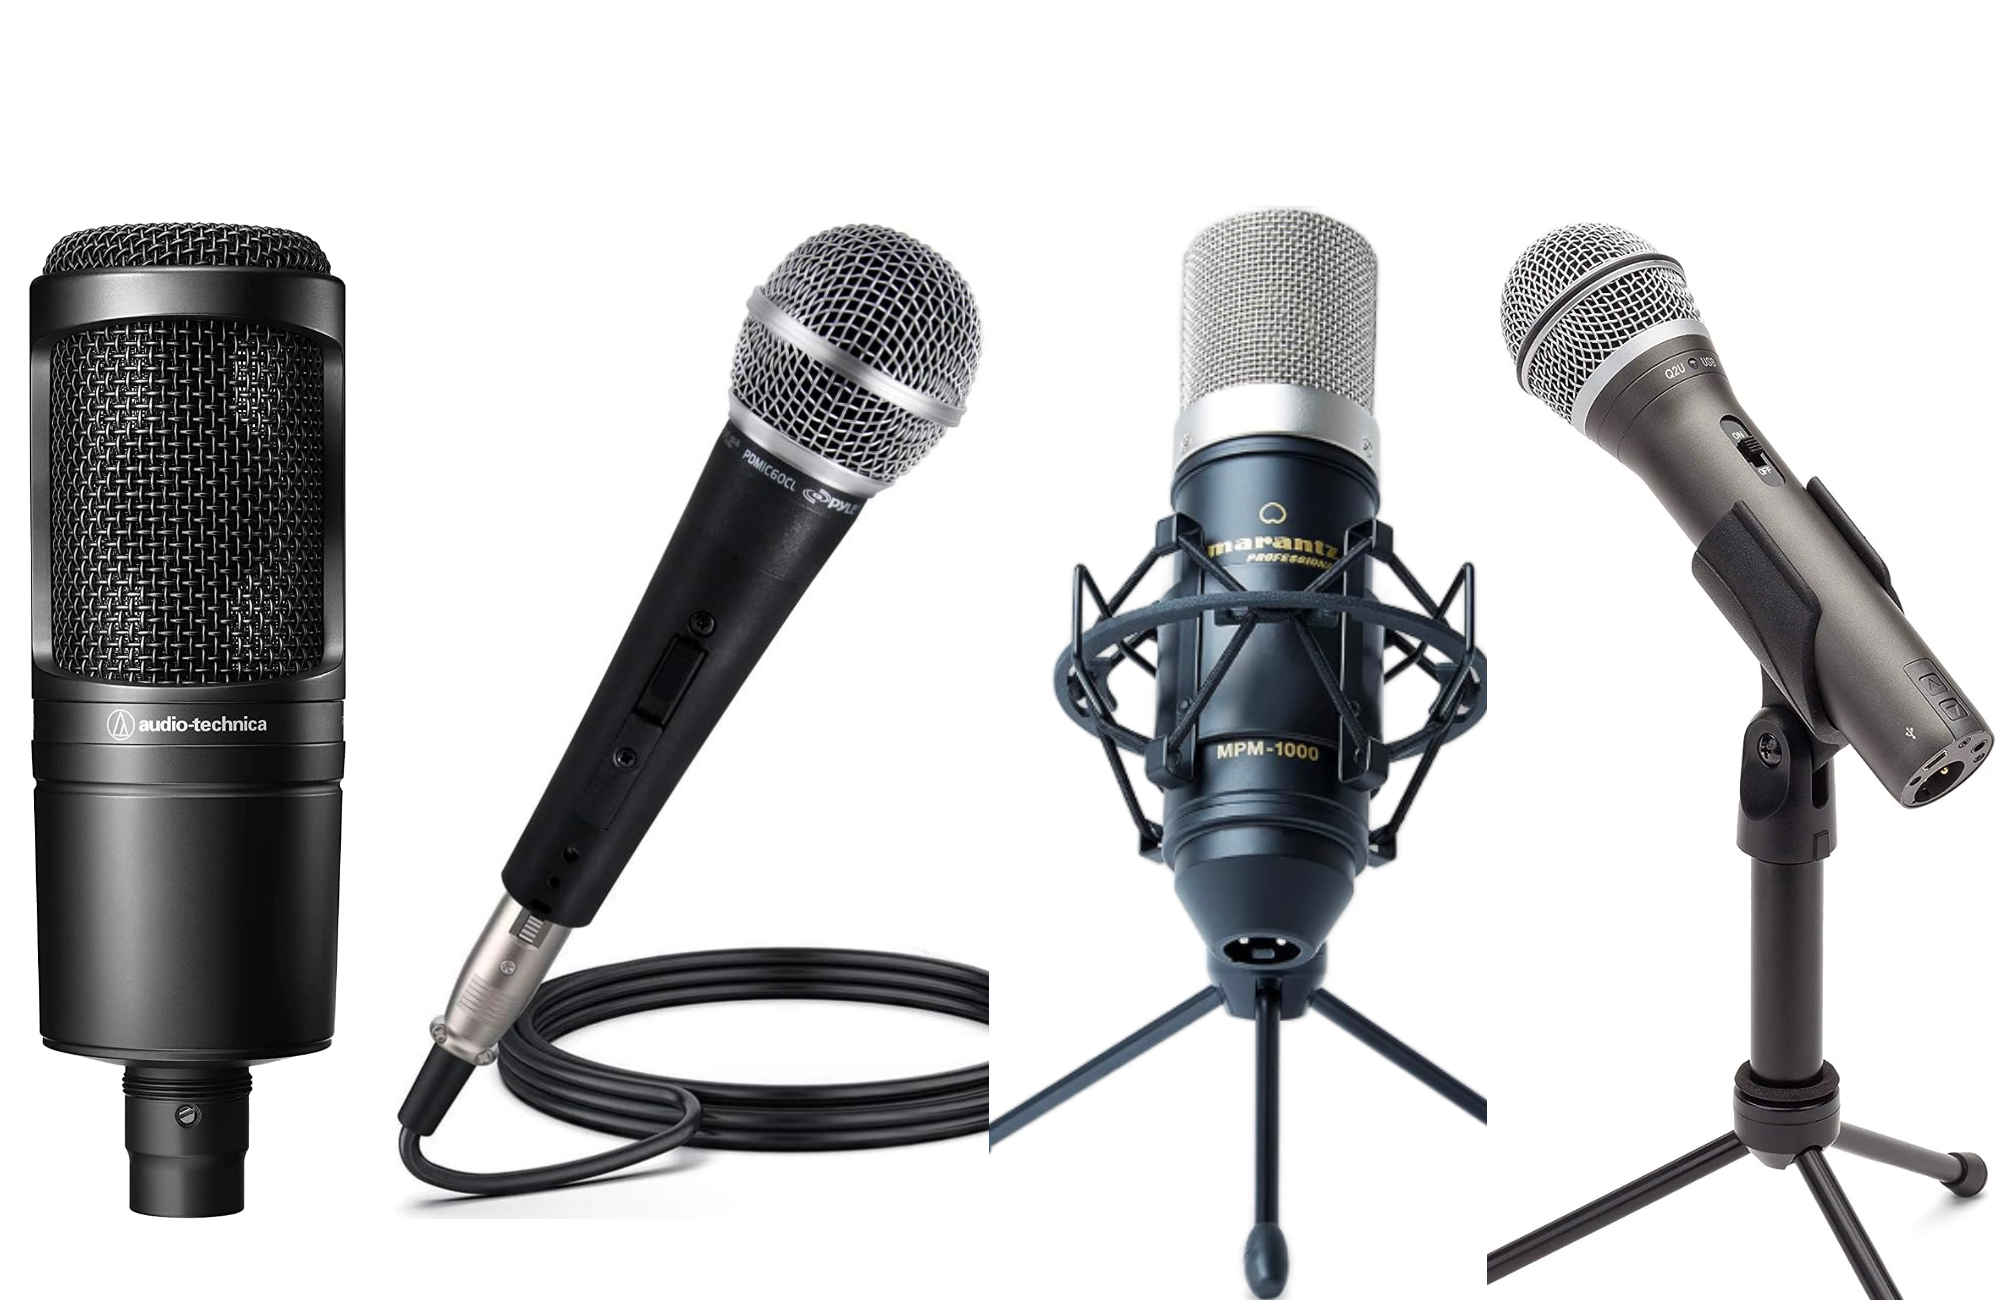 The BEST XLR Microphone For , Streaming, and Podcasting